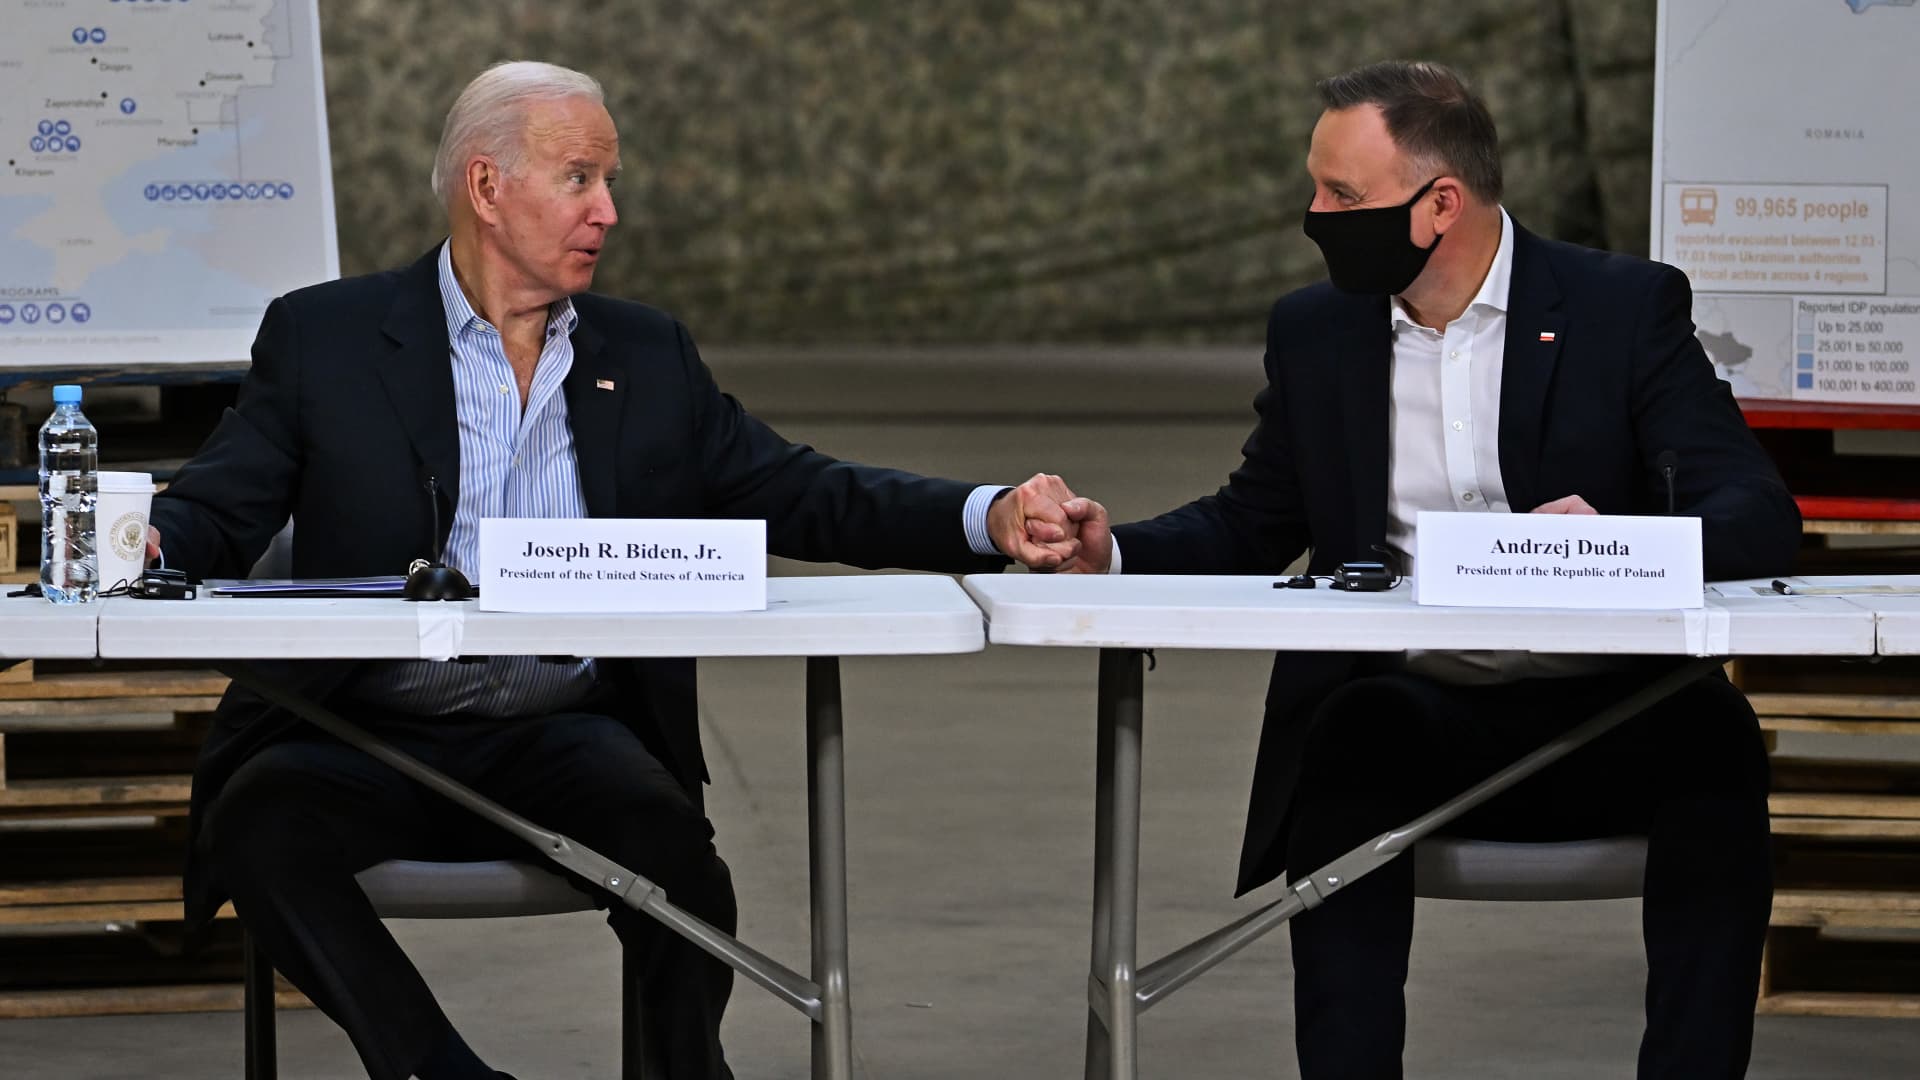 US President Joe Biden meets with the President of Poland, Andrzej Duda on March 25, 2022 in Rzeszow, Poland.